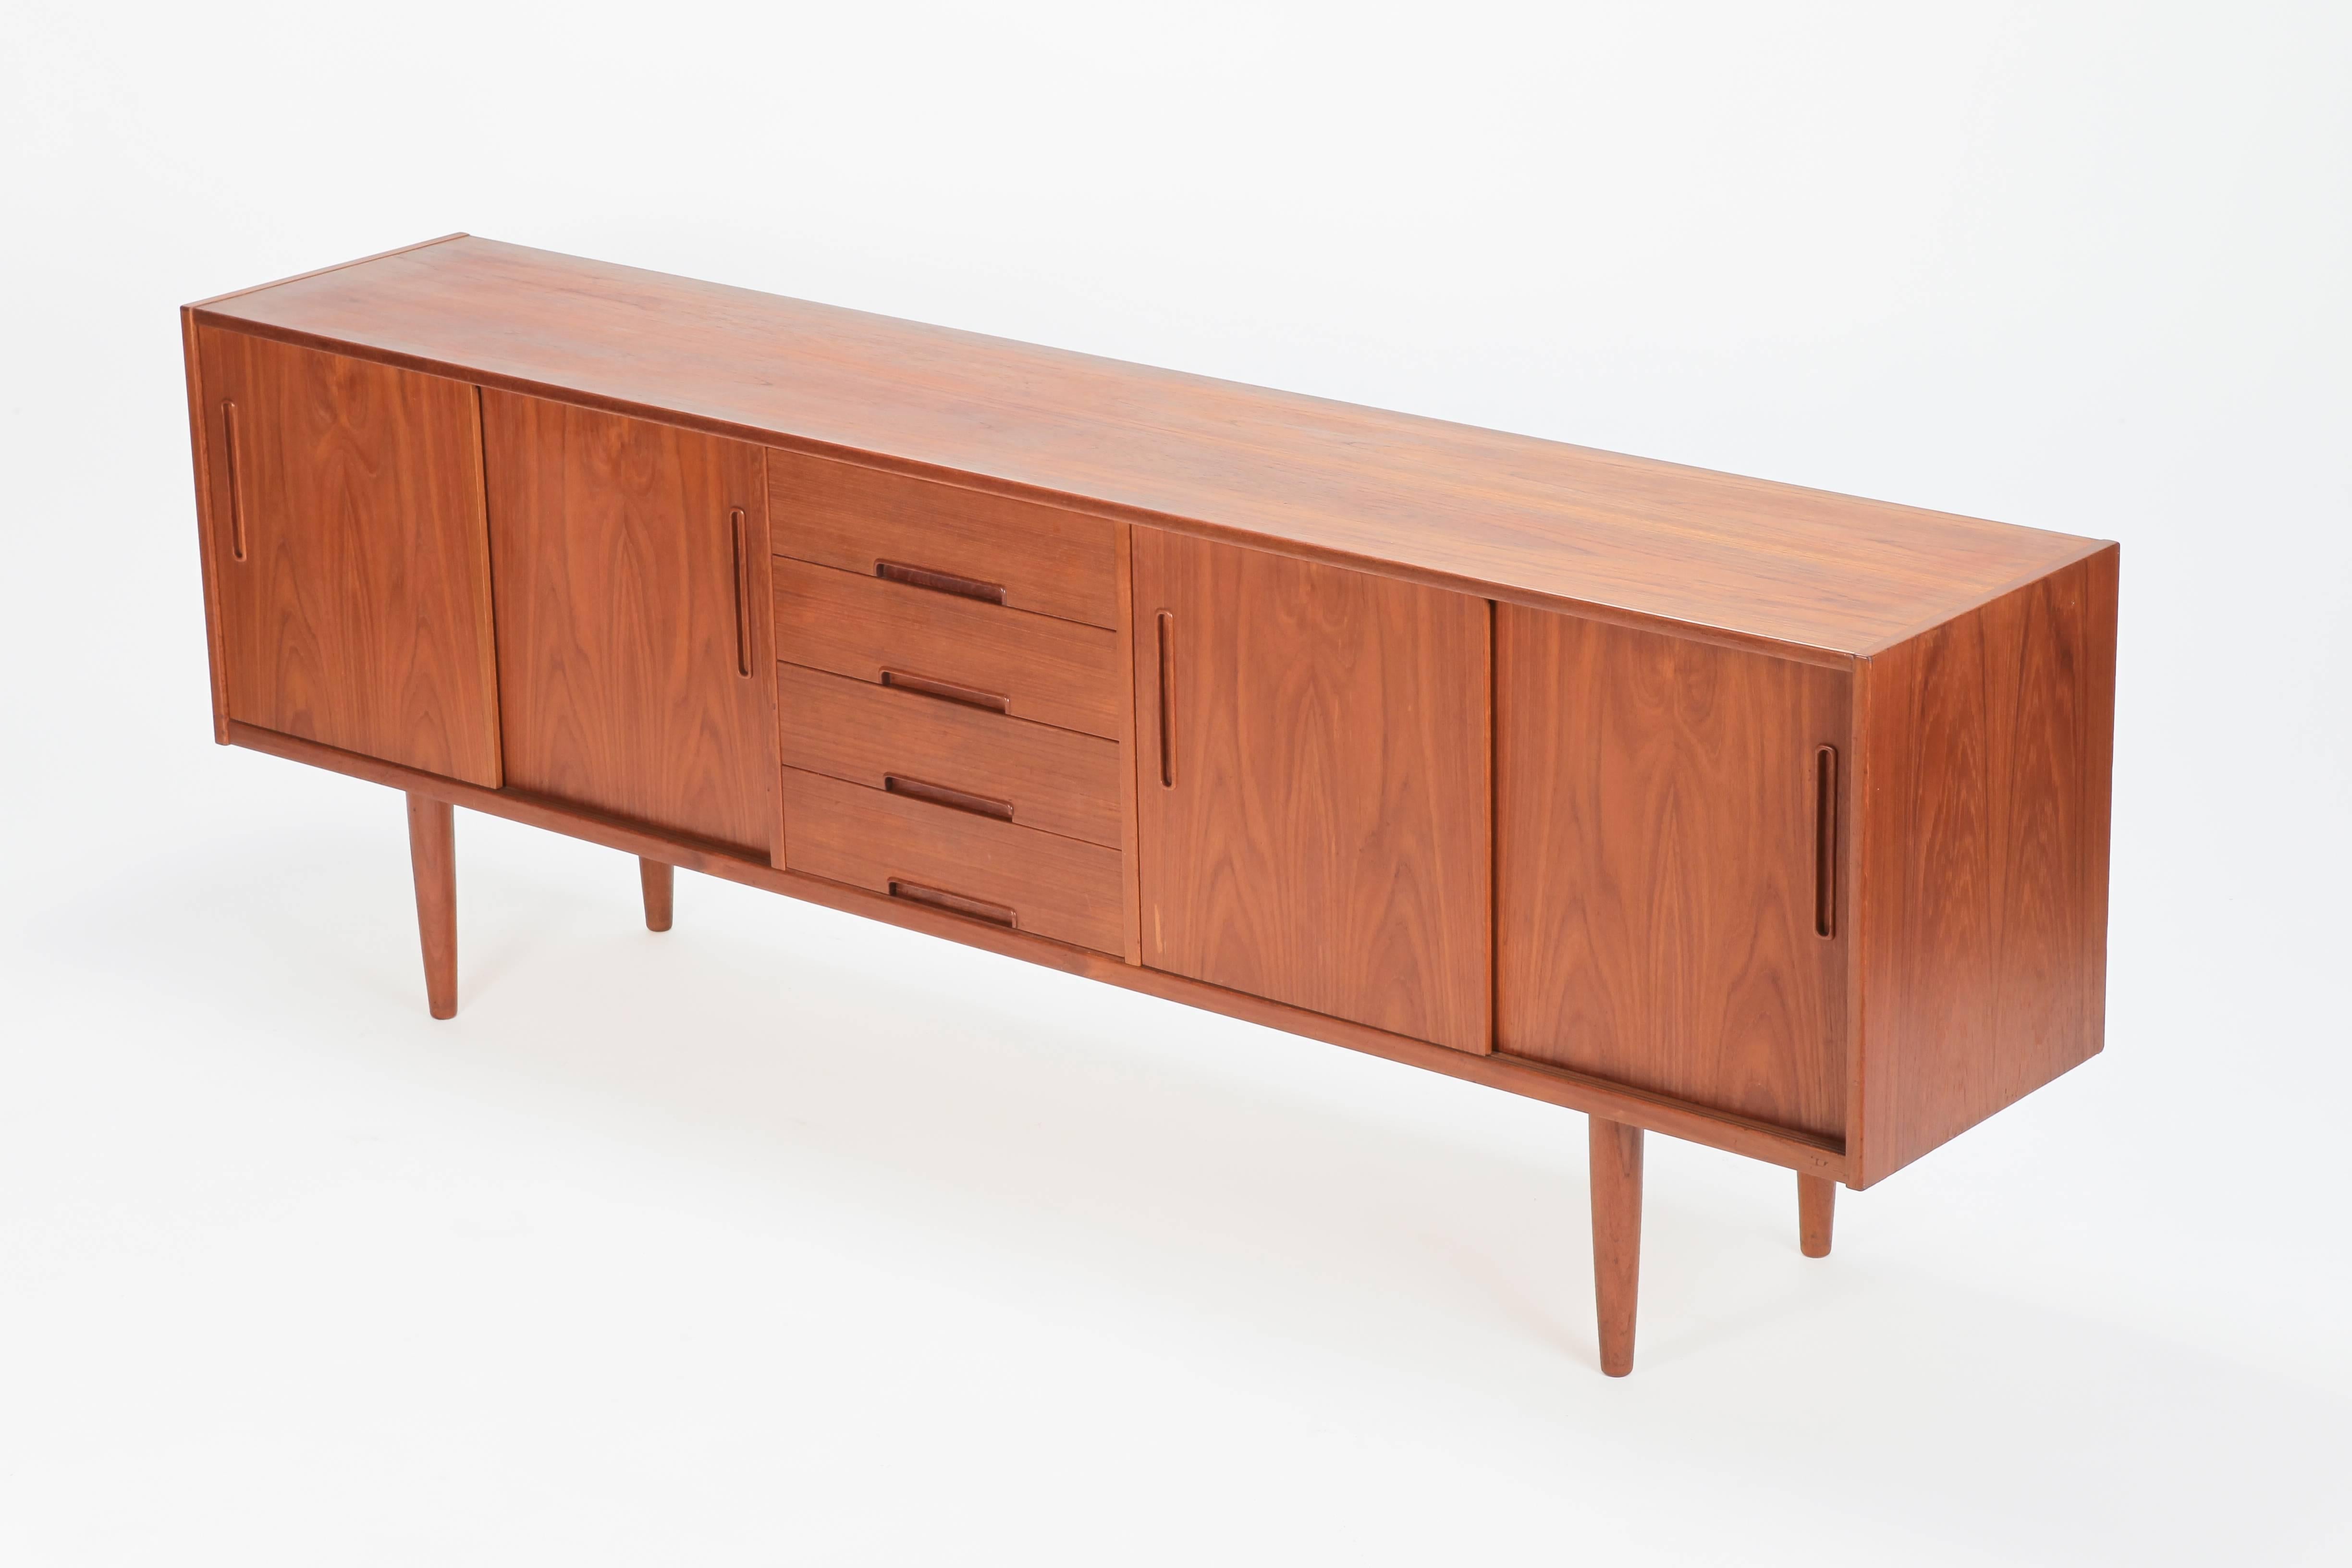 Nils Johnson sideboard manufactured in Sweden by Tores Bjärnum in the 1960s. This sideboard unites much storage and a wonderful timeless Scandinavian design. The board has in the middle four drawers and on both sides there are compartments with